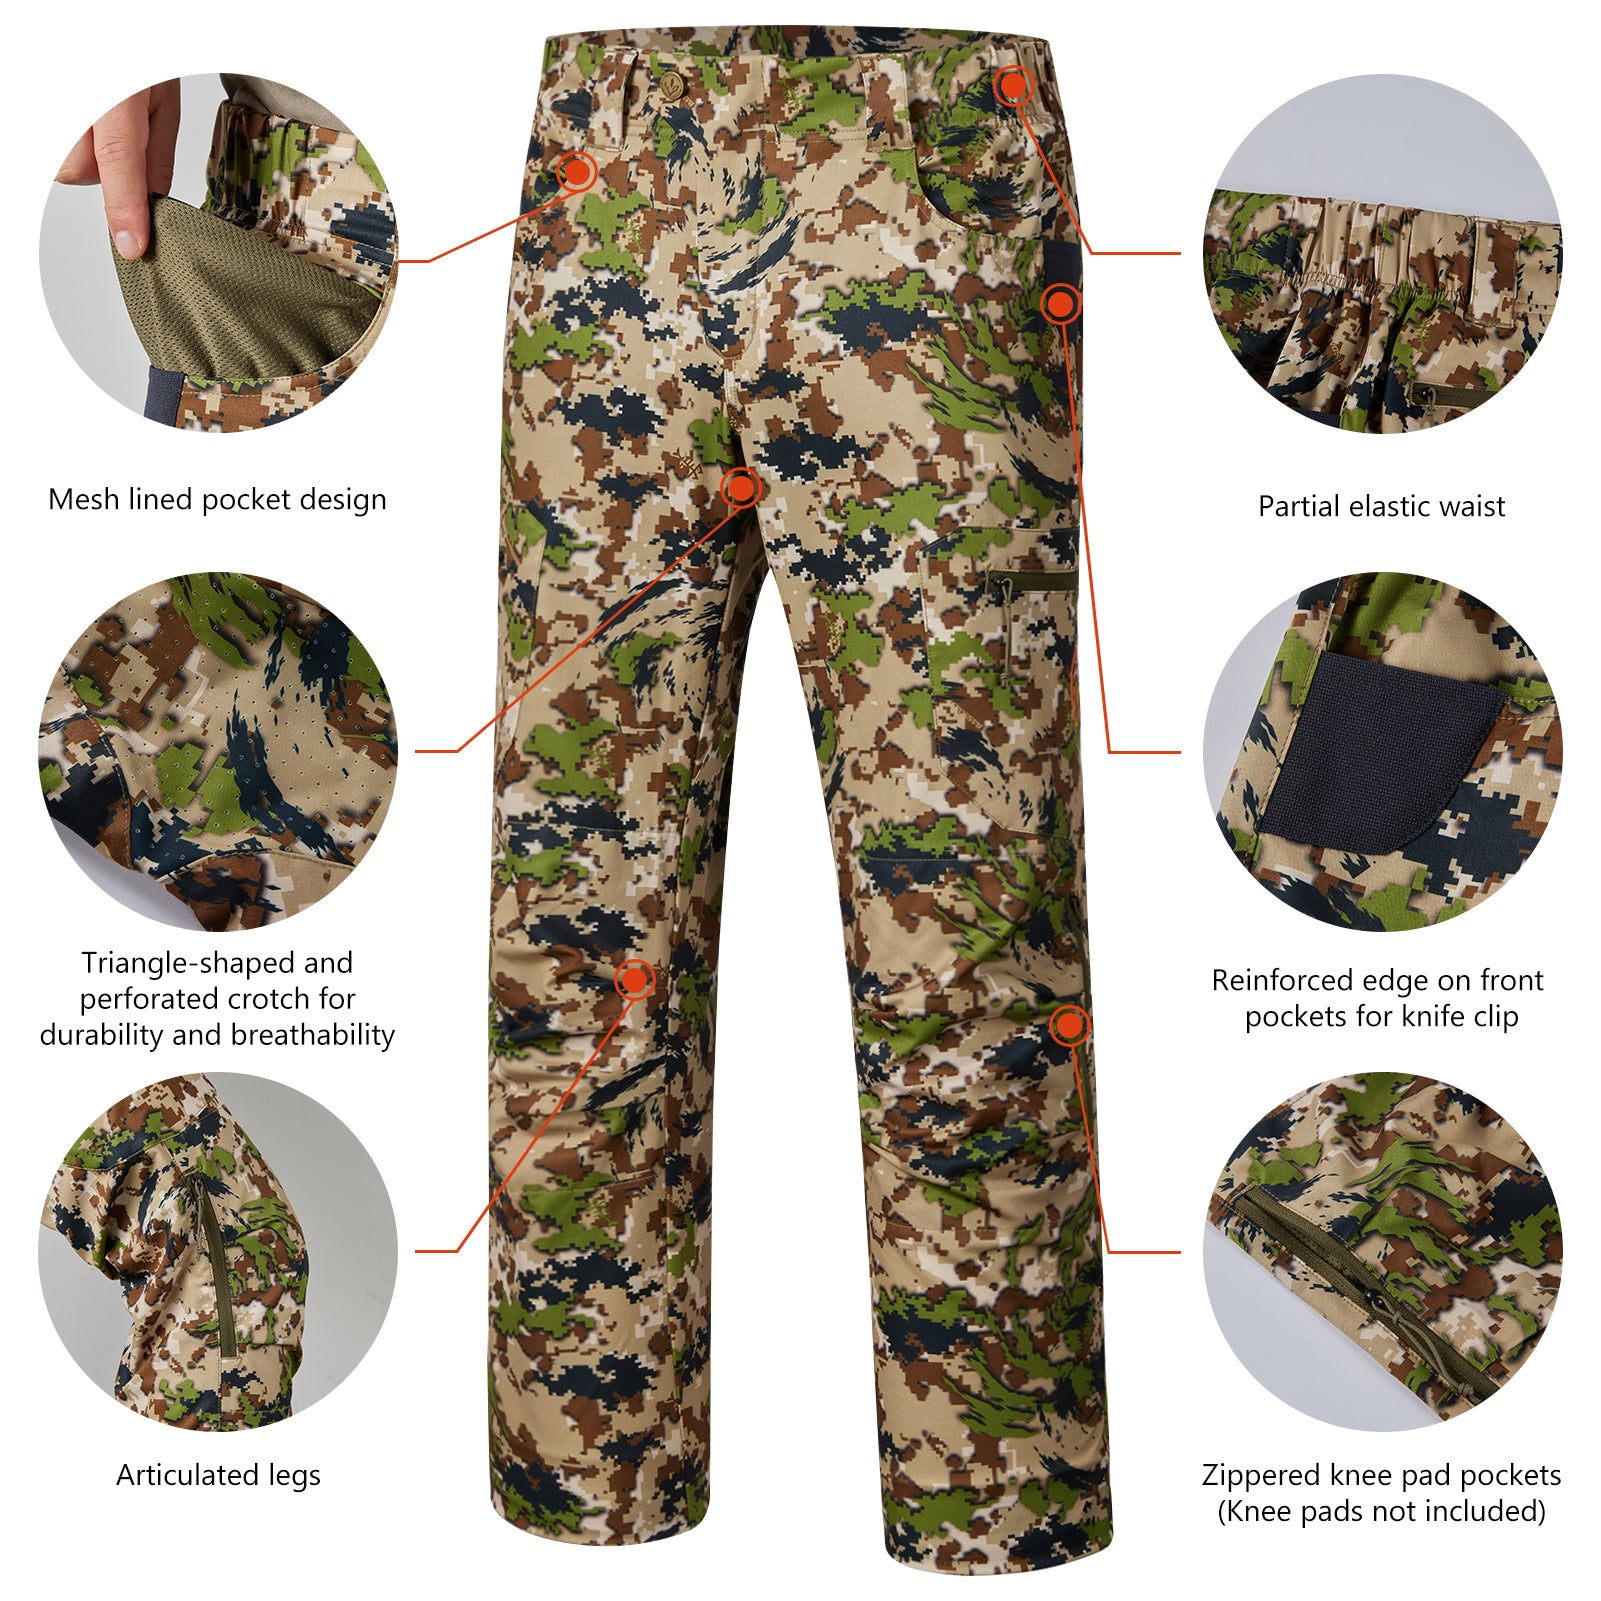 BASSDASH Invis Men's Stretch Hunting Pants Water Resistant Camo Fishing Pant